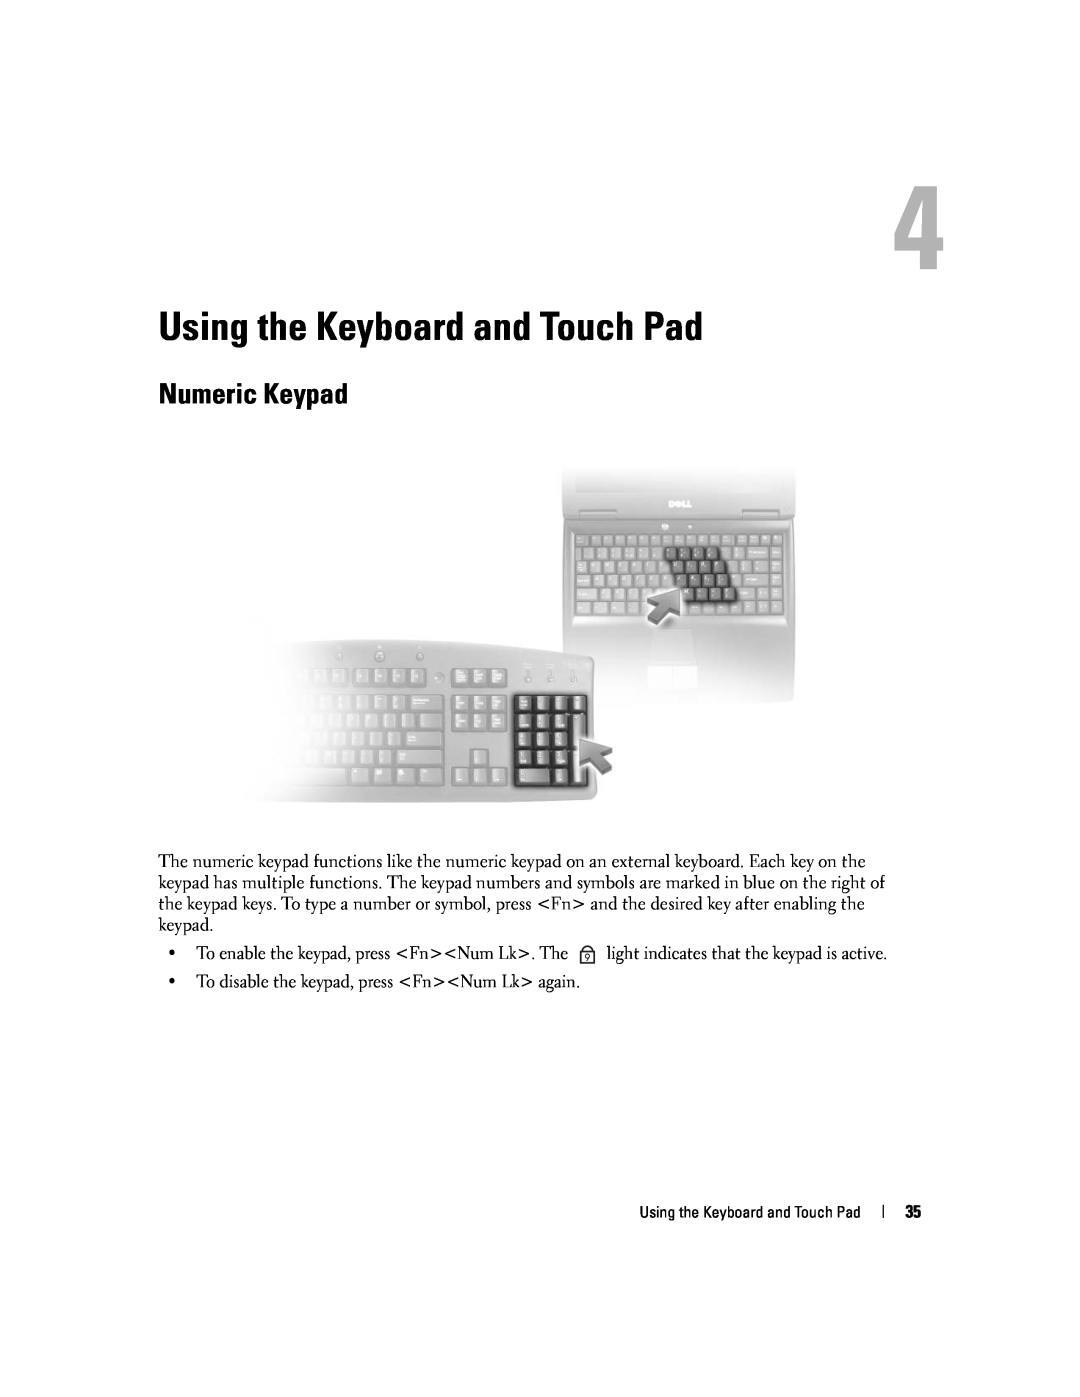 Dell 1501 owner manual Using the Keyboard and Touch Pad, Numeric Keypad 